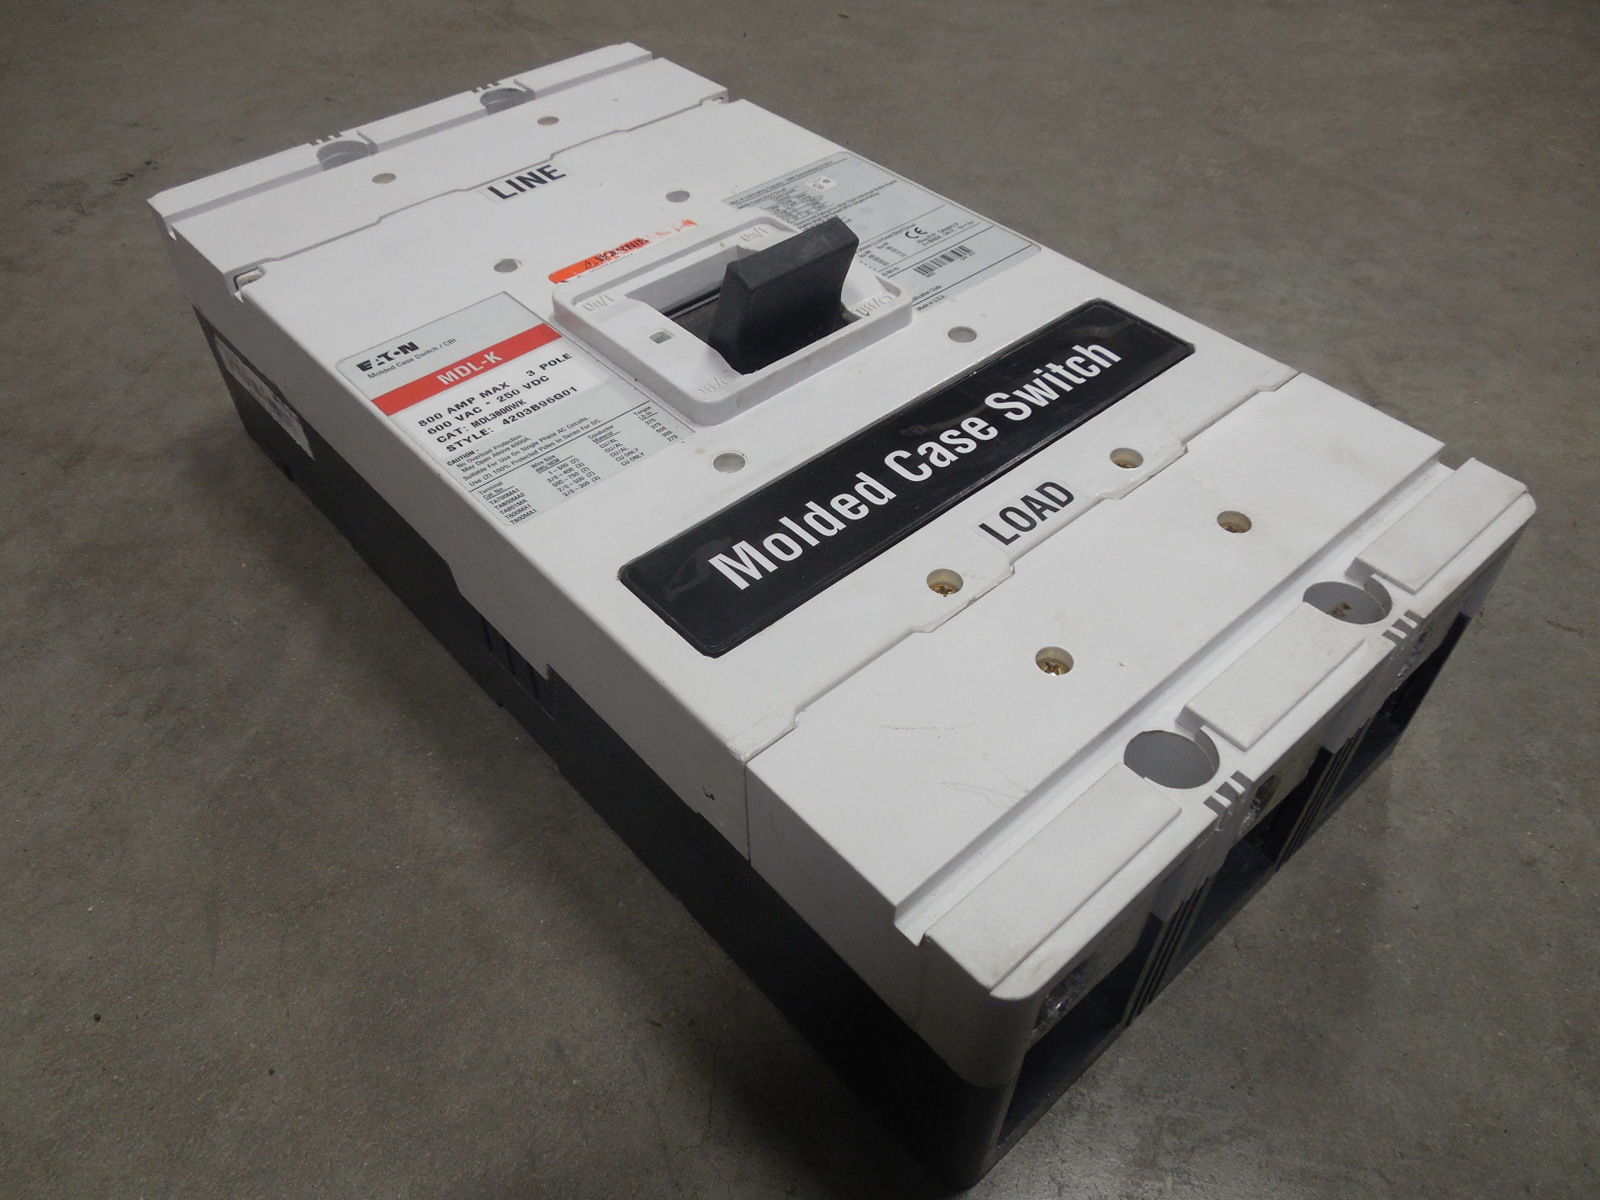 USED Eaton MDL3800WK Molded Case Switch 800 Amps 600VAC MDL- MDL-K,伊顿,PLC